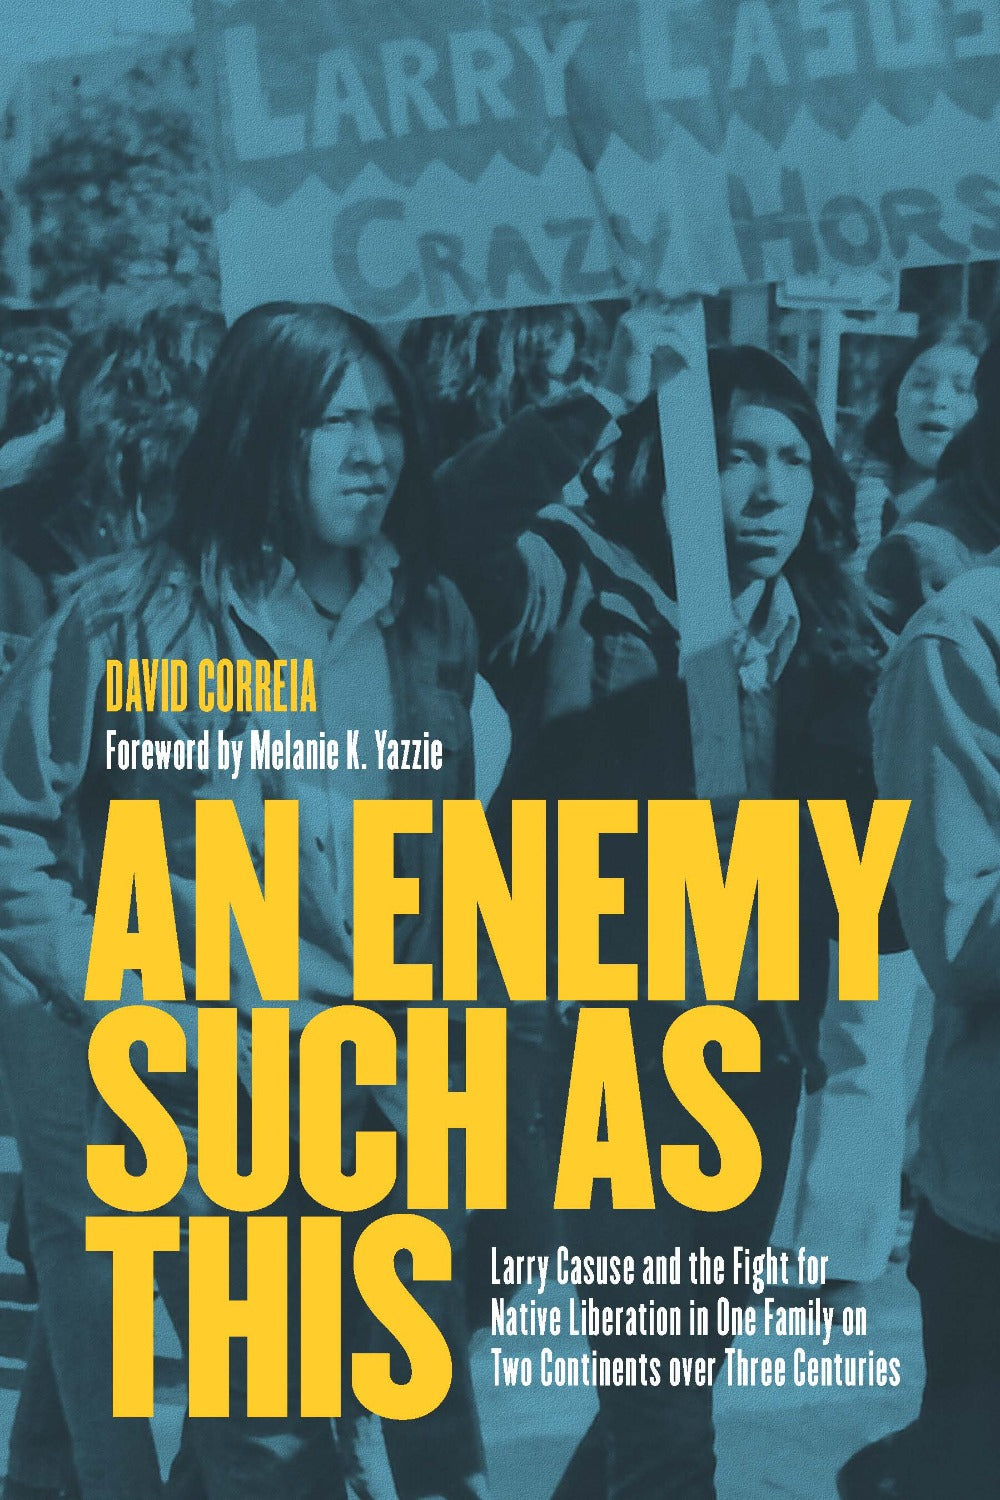 An Enemy Such as This: Larry Casuse and the Fight for Native American Liberation in One Family on Two Continents over Three Centuries by David Correia